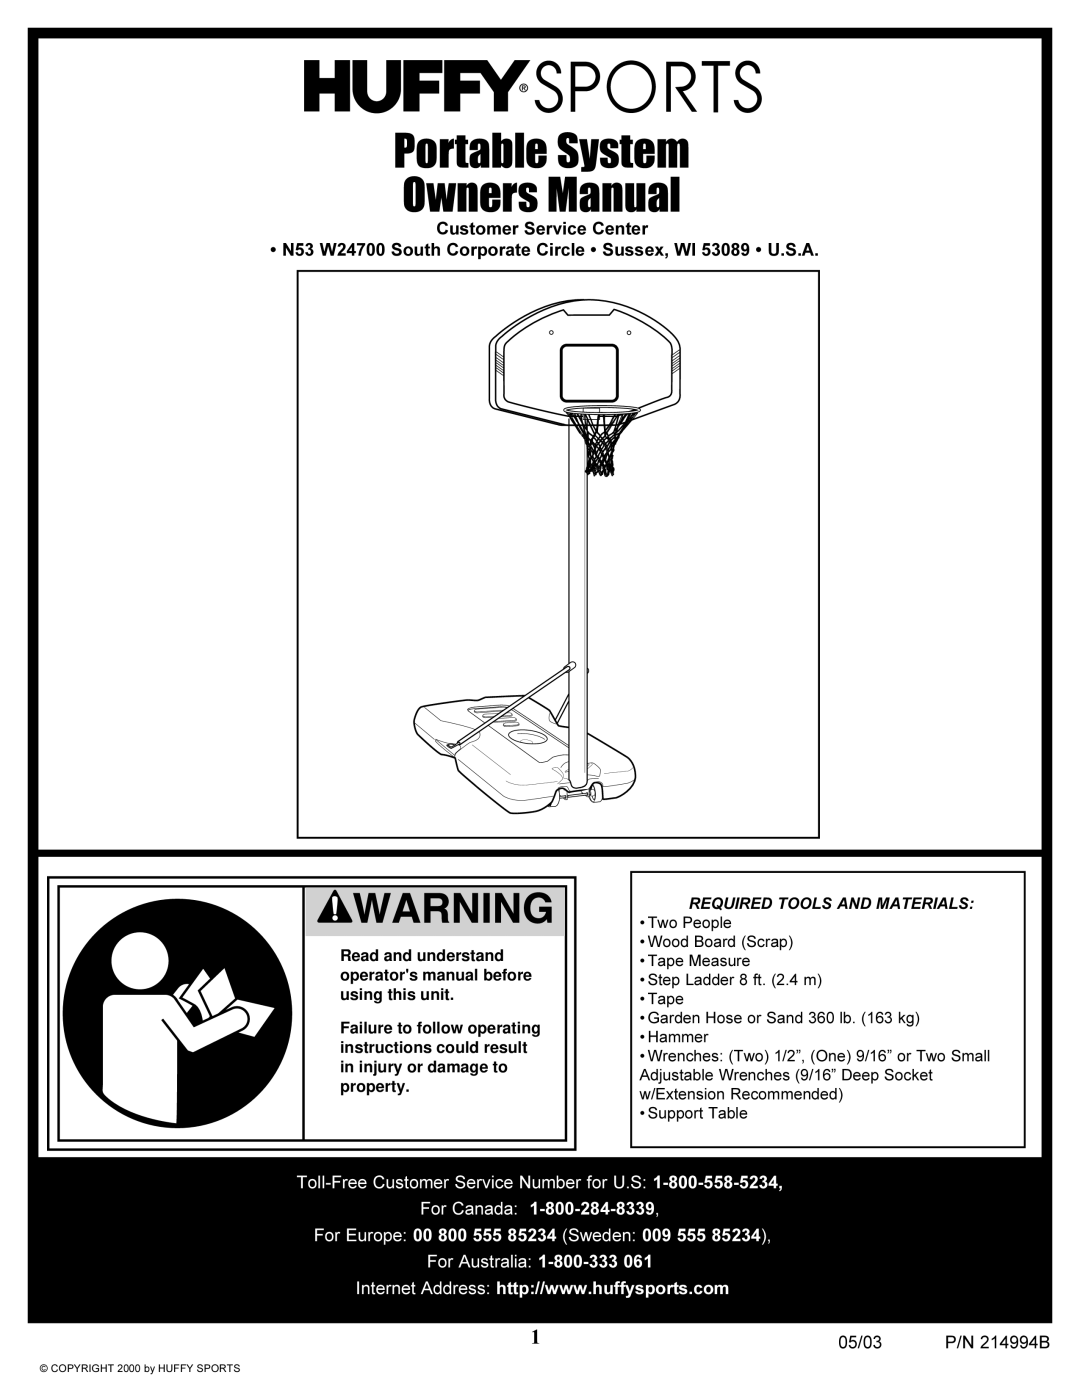 Spalding manual Portable System Owners Manual, Customer Service Center, 05/03, P/N 214994B 